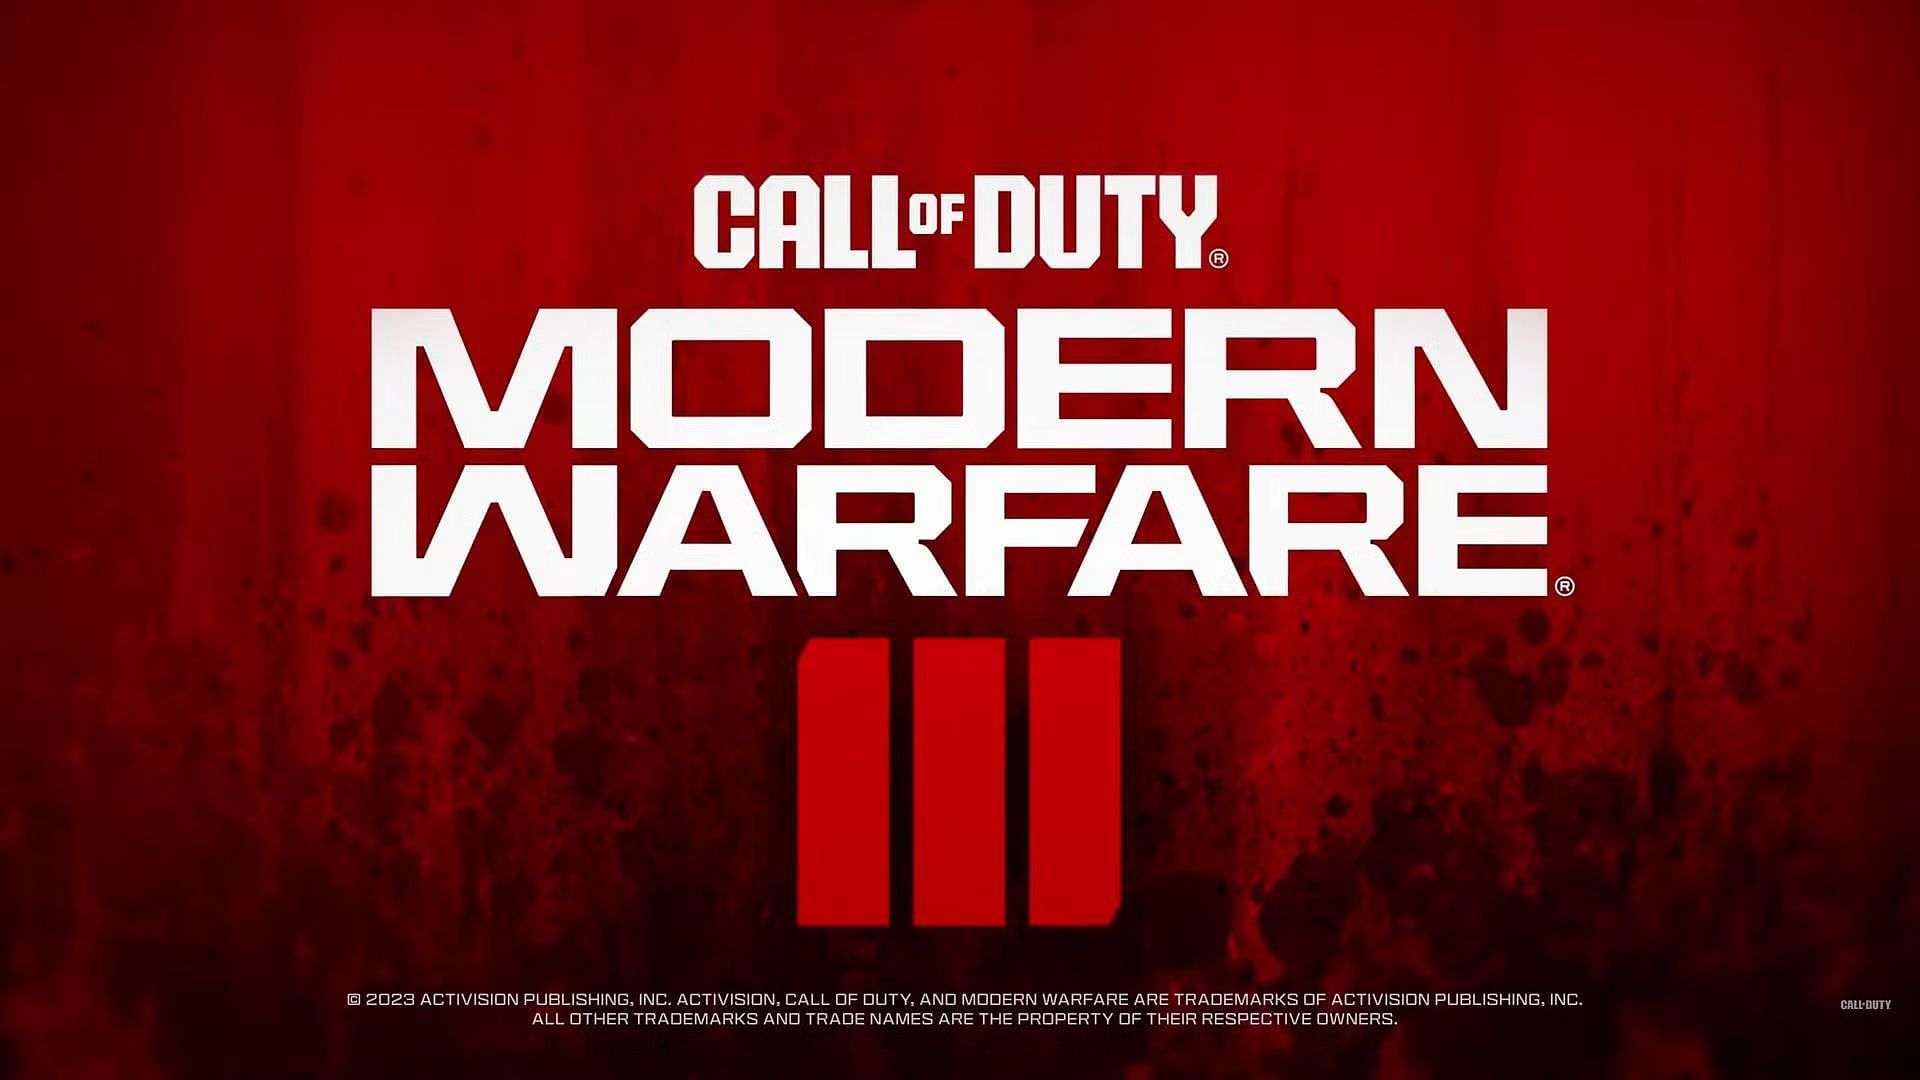 Get ready for CoD Next, the highly anticipated MW3 release, a fresh Warzone experience, and more